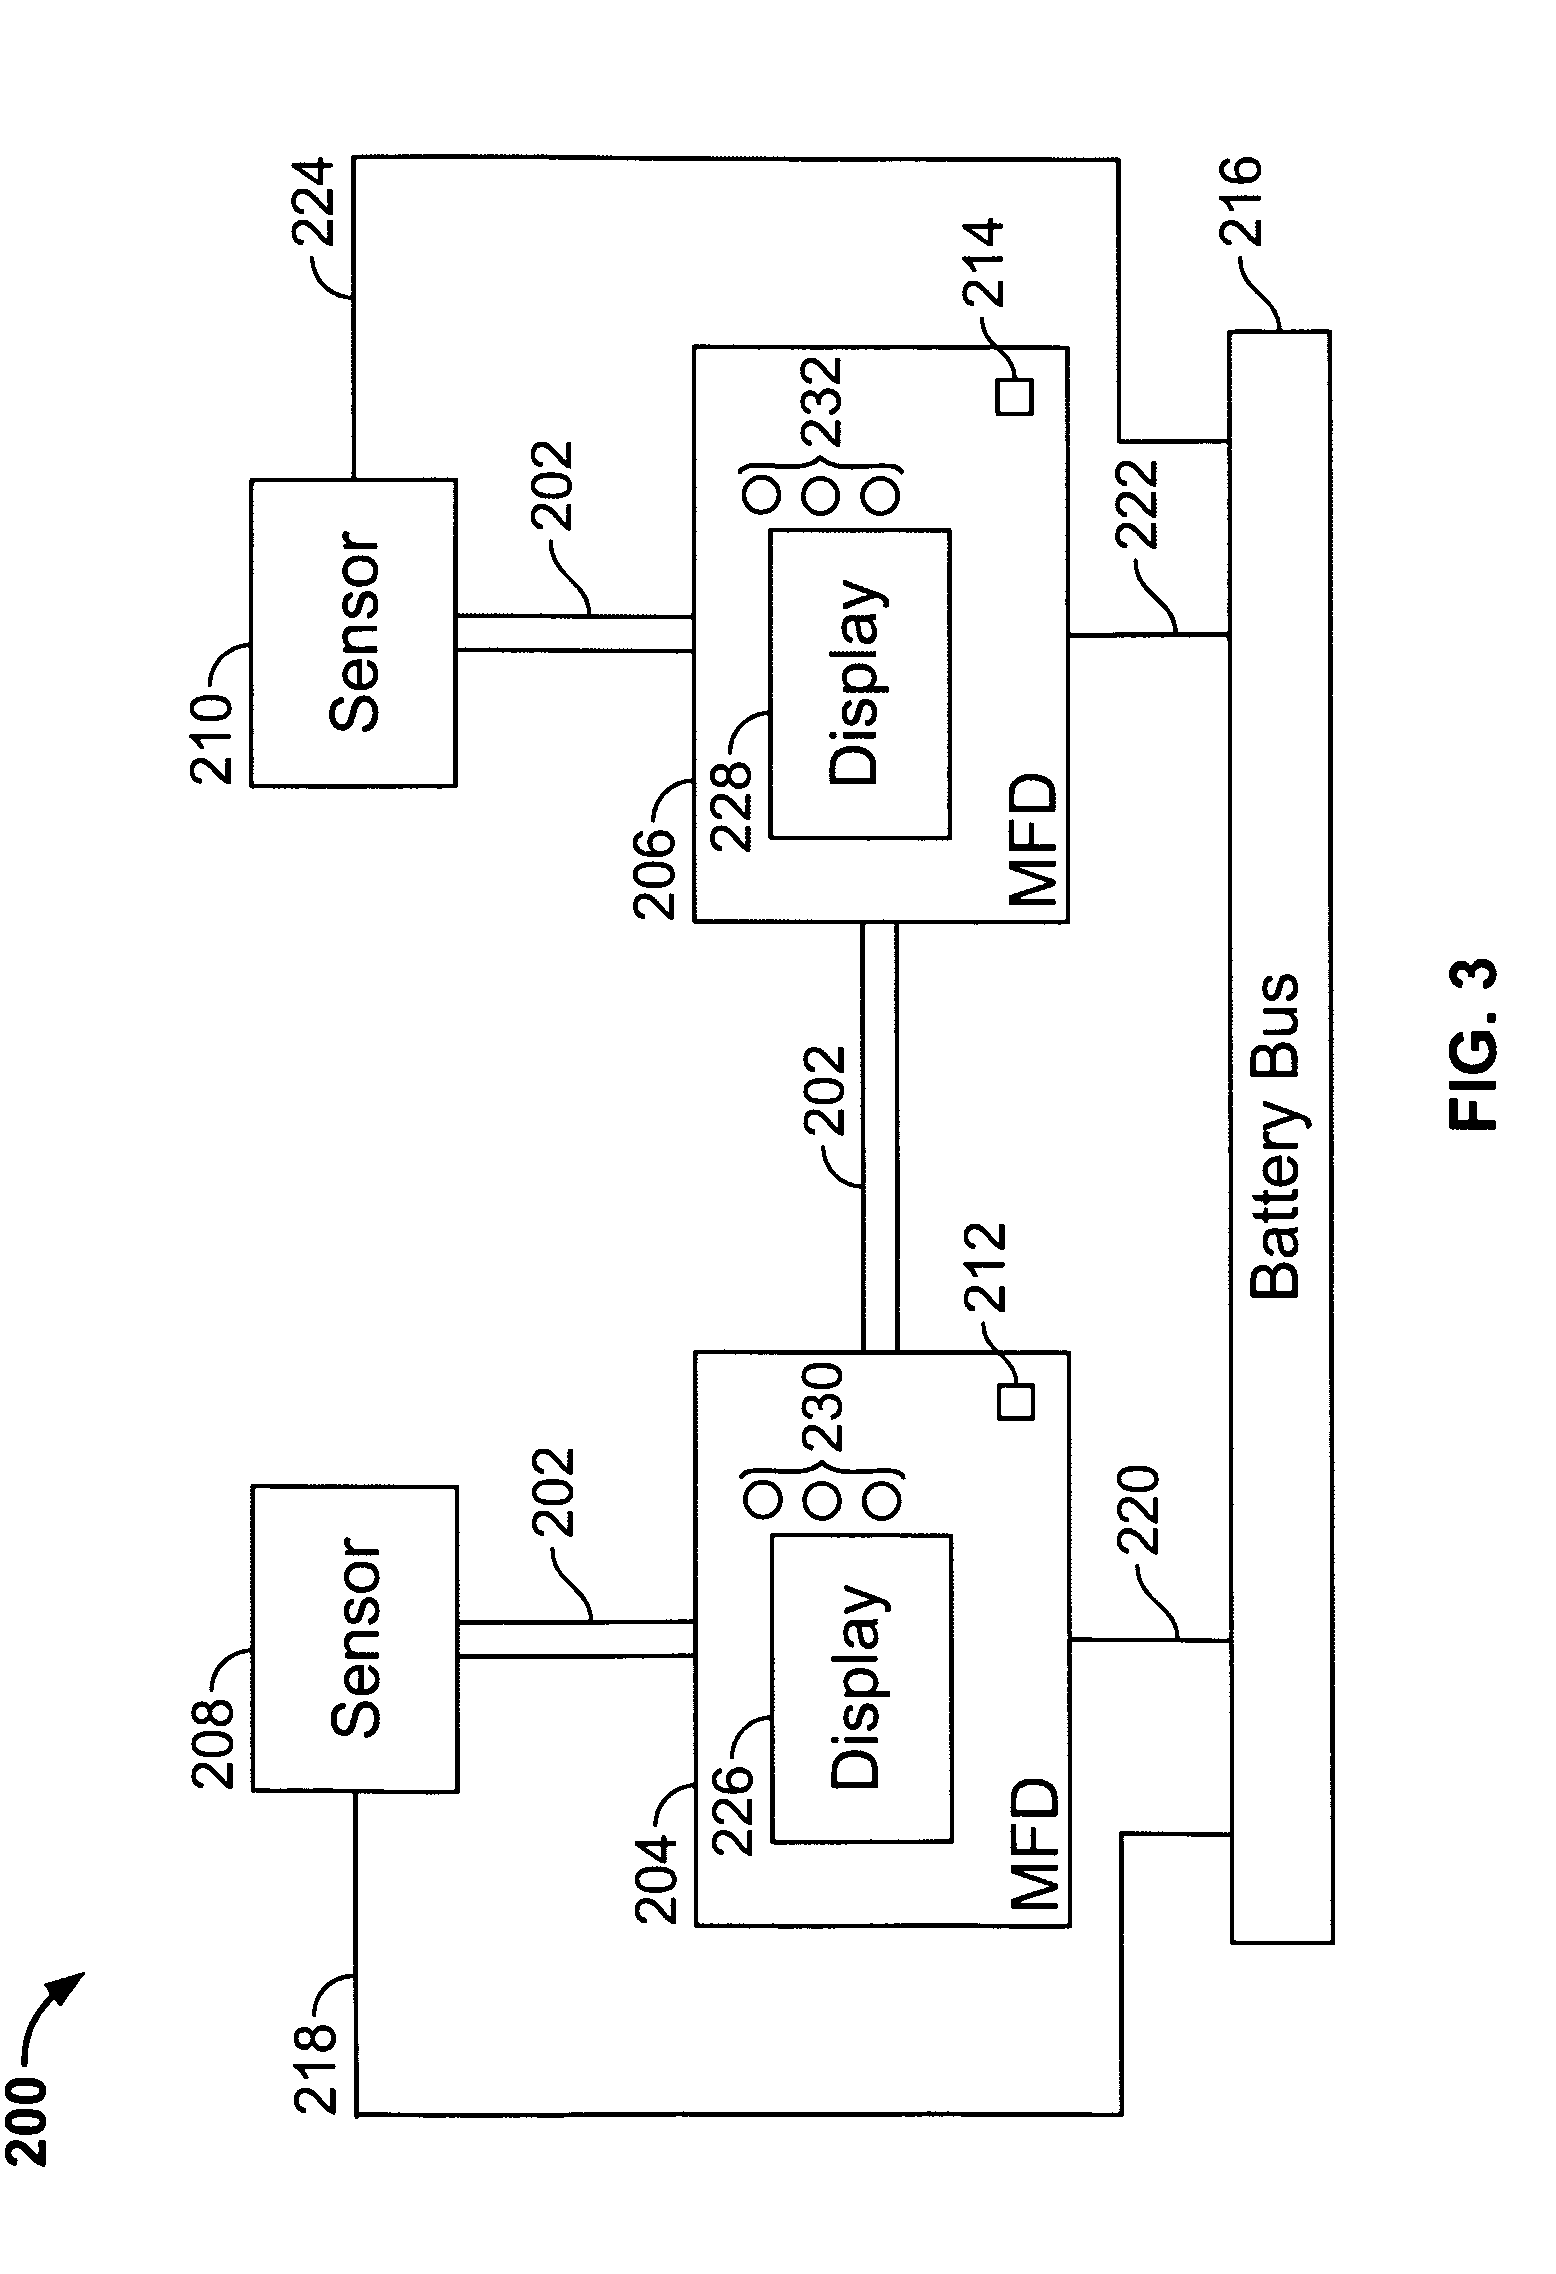 Method and apparatus for remote device control using control signals superimposed over Ethernet